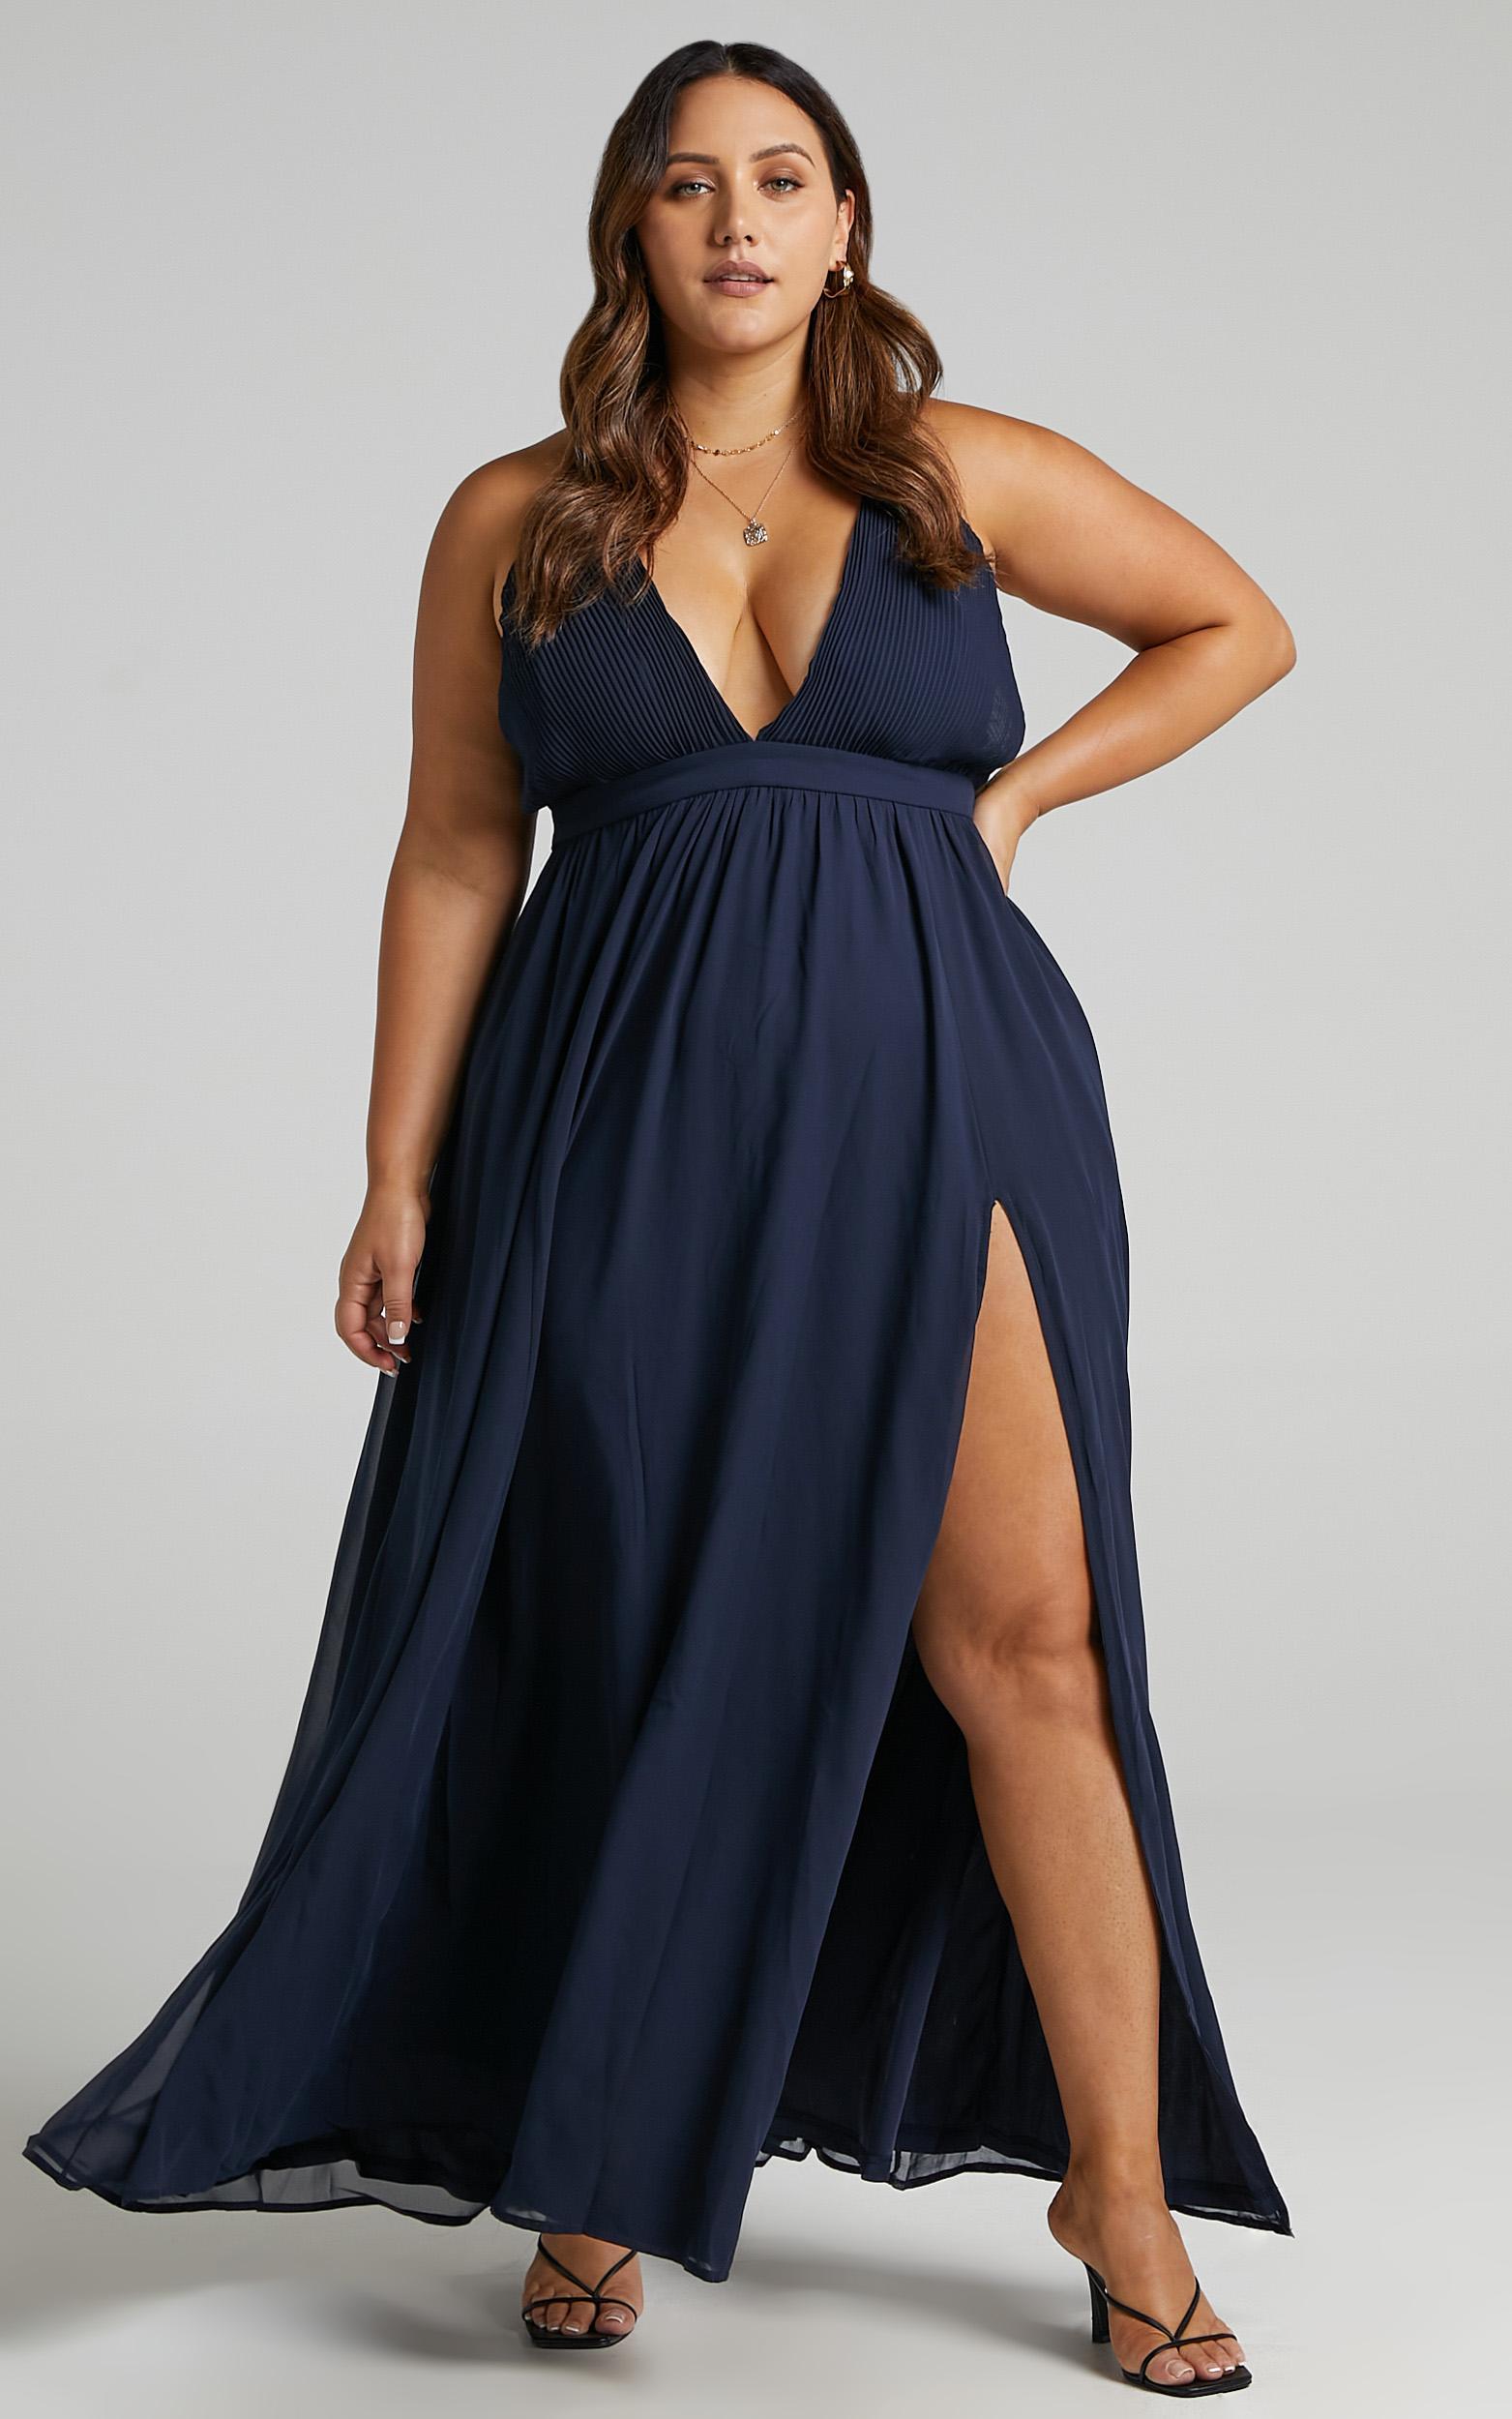 Shes A Delight Maxi Dress in Navy - 06, NVY4, hi-res image number null